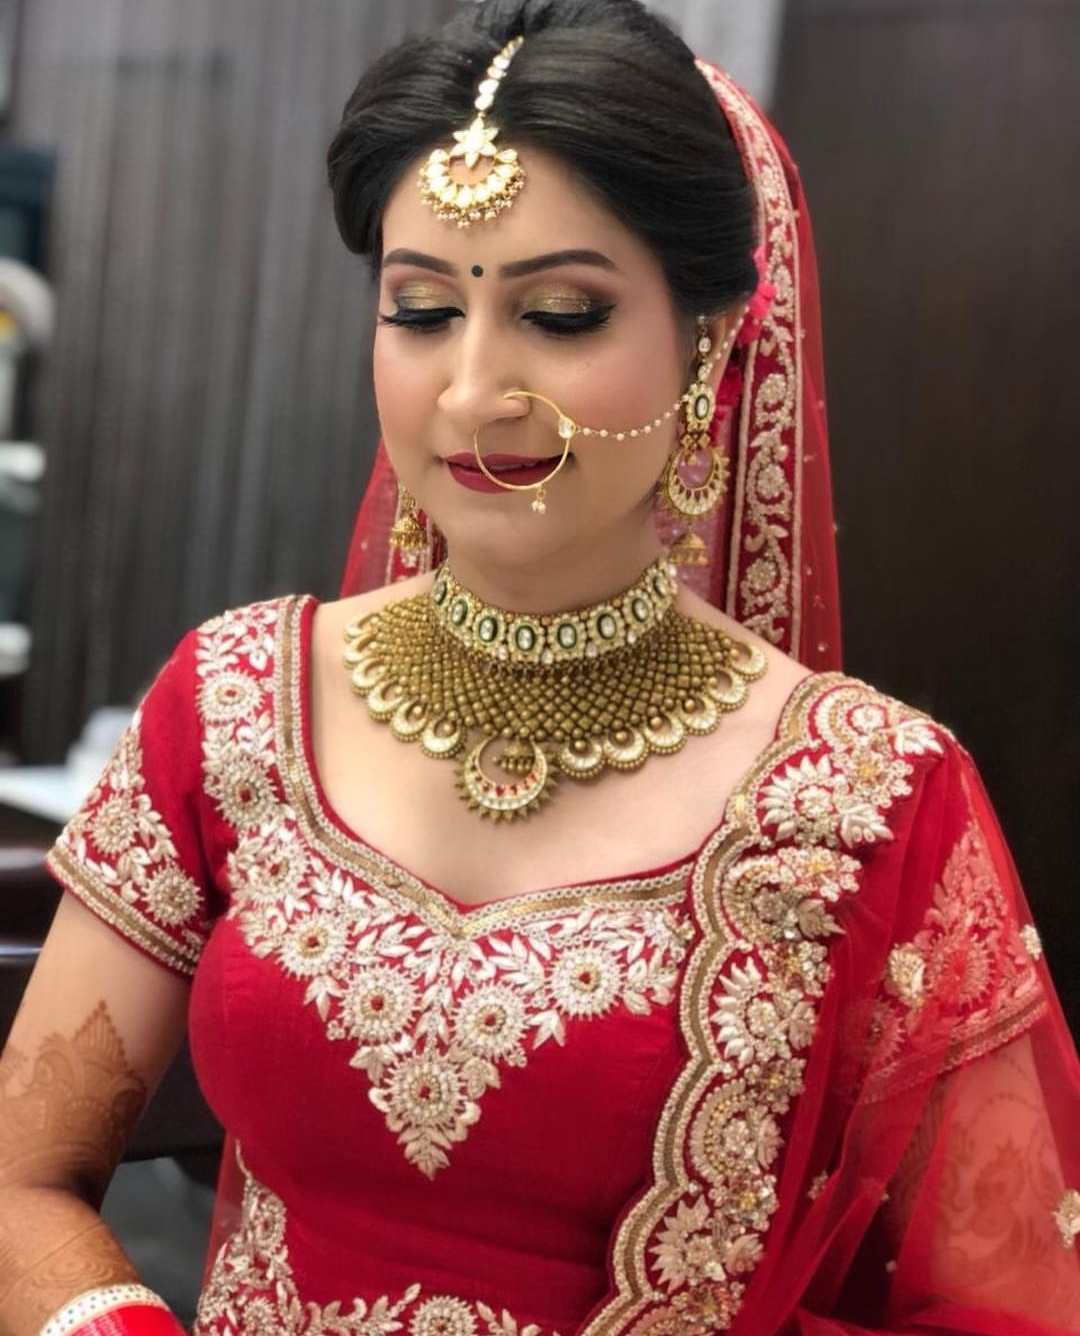 Pooja Ohri Makeup Artist Services, Review and Info - Olready